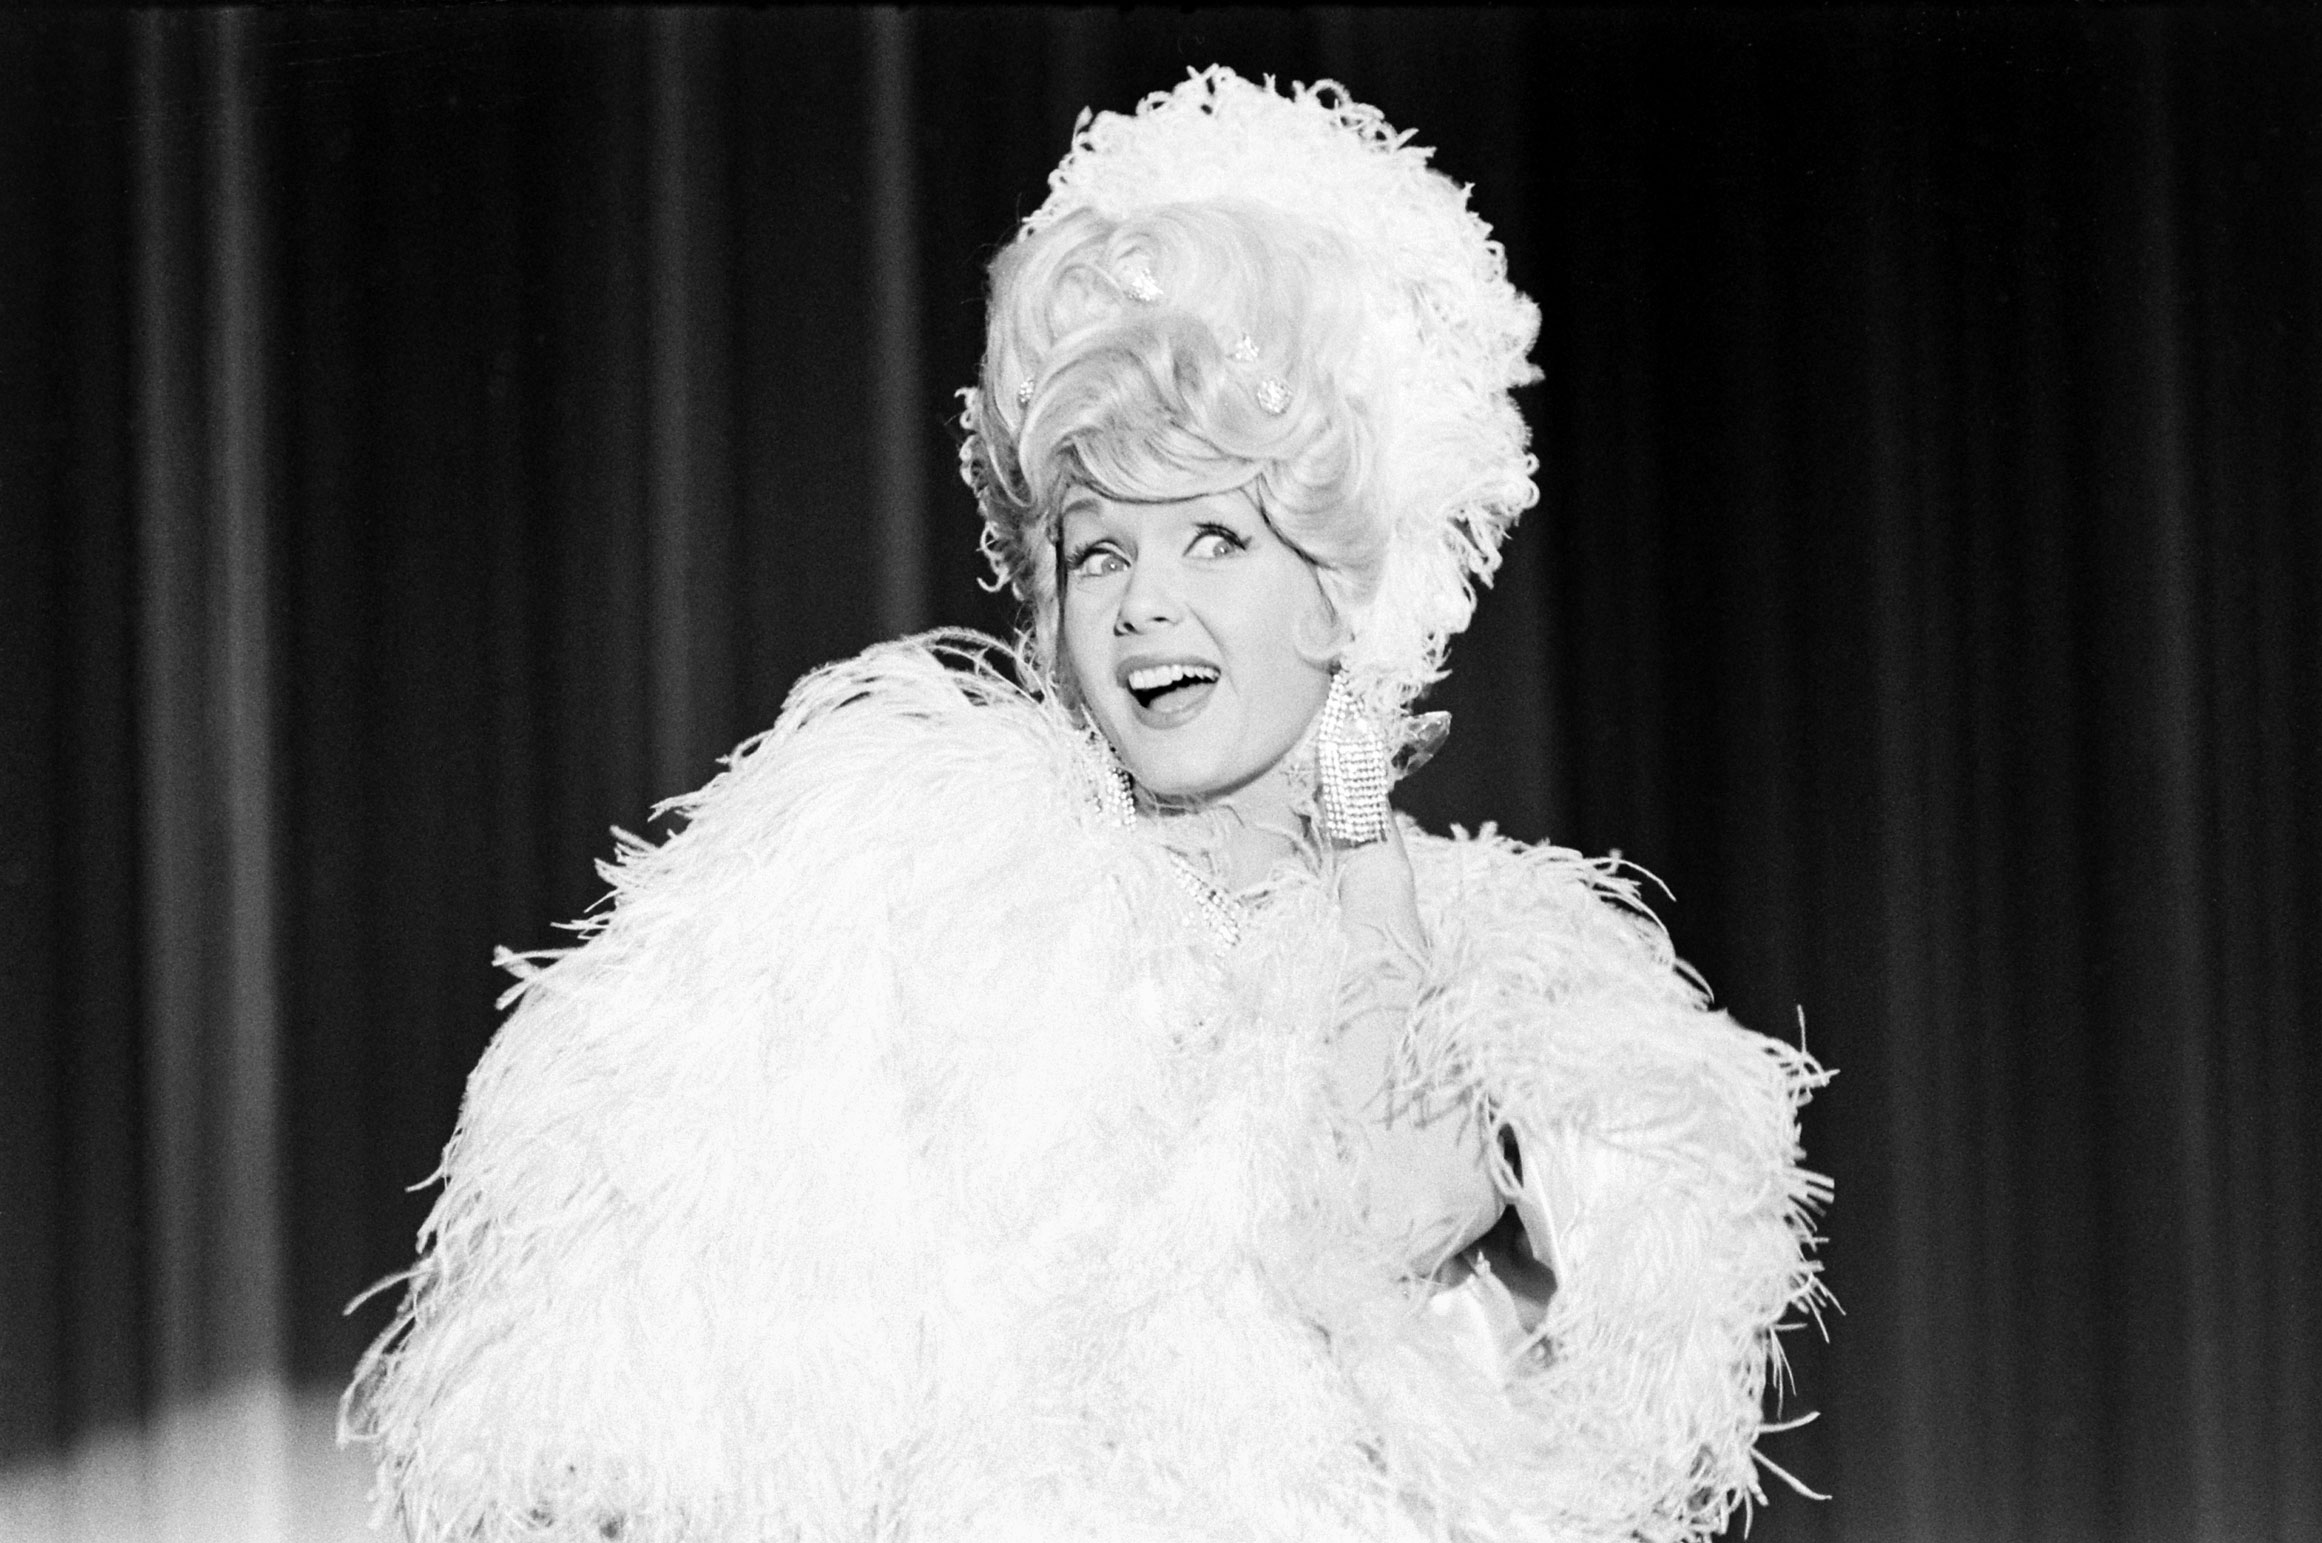 Debbie Reynolds acting as Zsa Zsa Gabor, 1965.